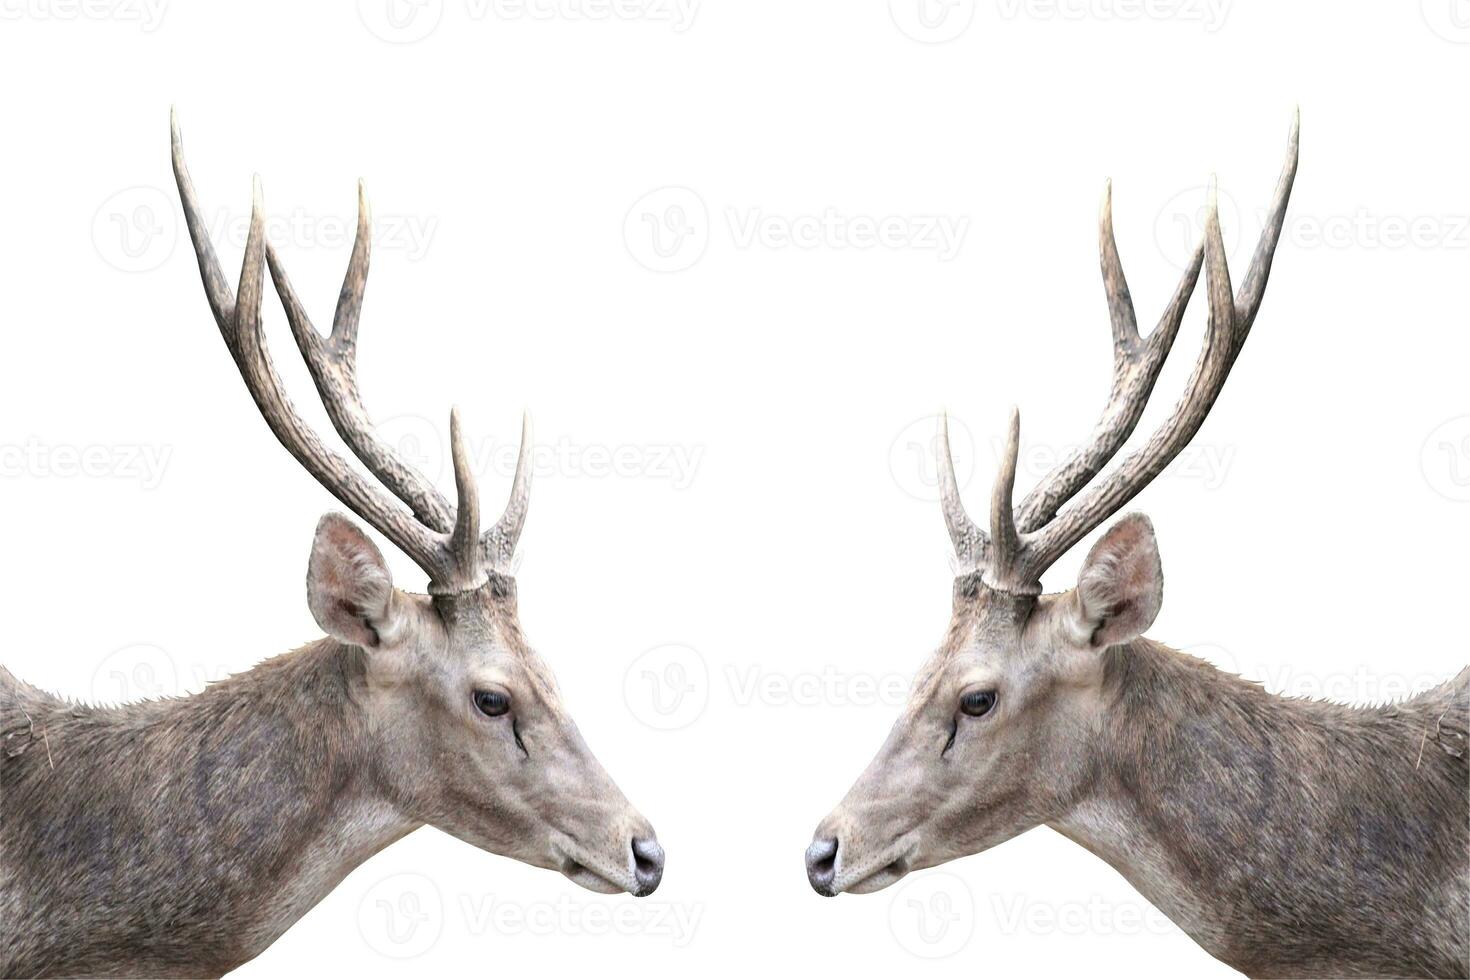 herd of deer in the zoo on white background with animals theme photo